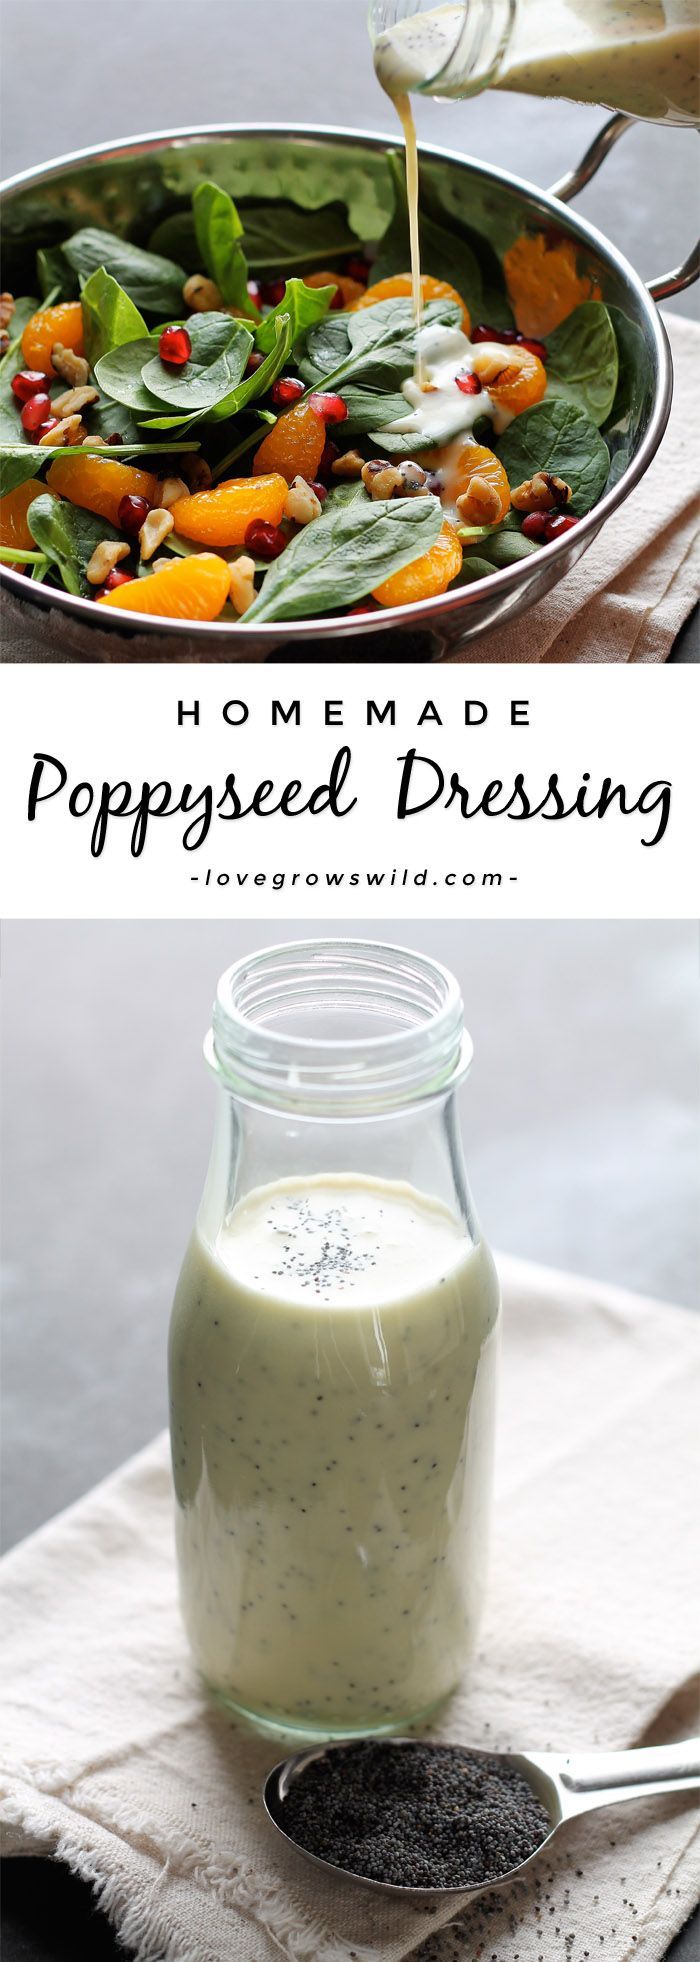 A fresh, healthy Poppyseed Dressing that you can whip up in just seconds! Way better than store-bought!